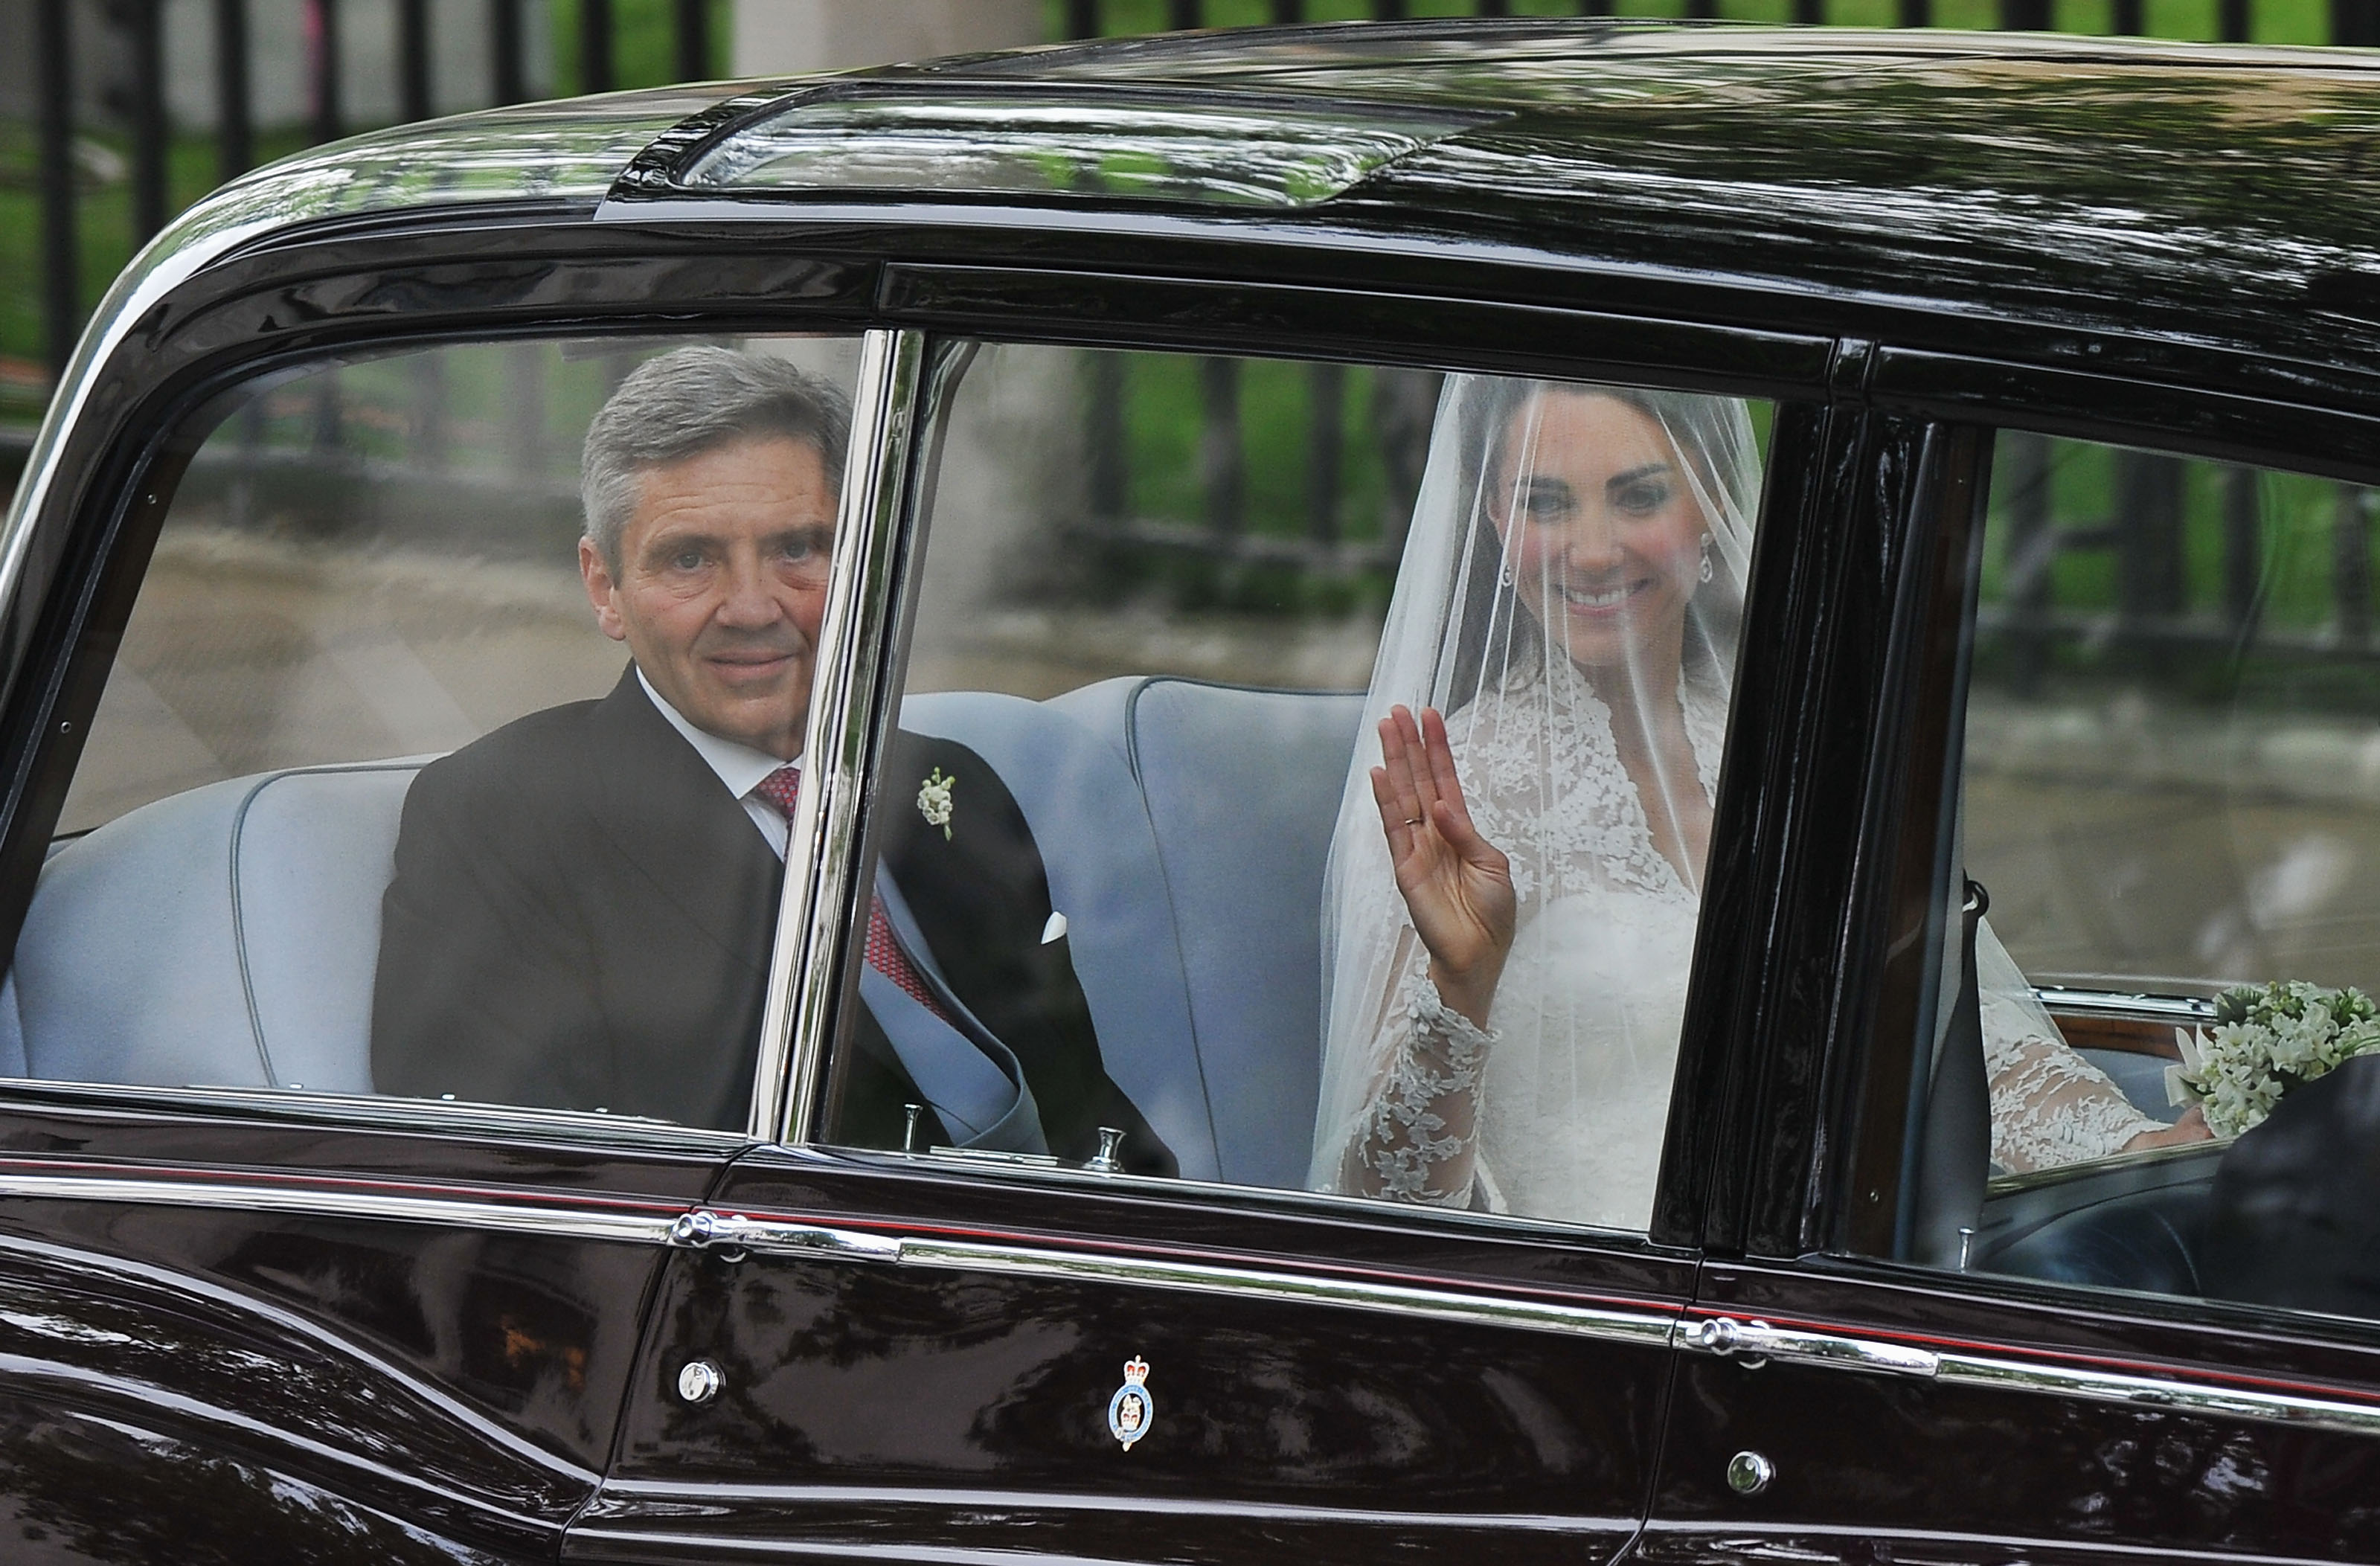 Catherine Middleton, Duchess of Cambridge, with her father Michael Middleton, smiles as she arrives at Westminster Abbey for the Royal Wedding, Central London, April 29, 2011.